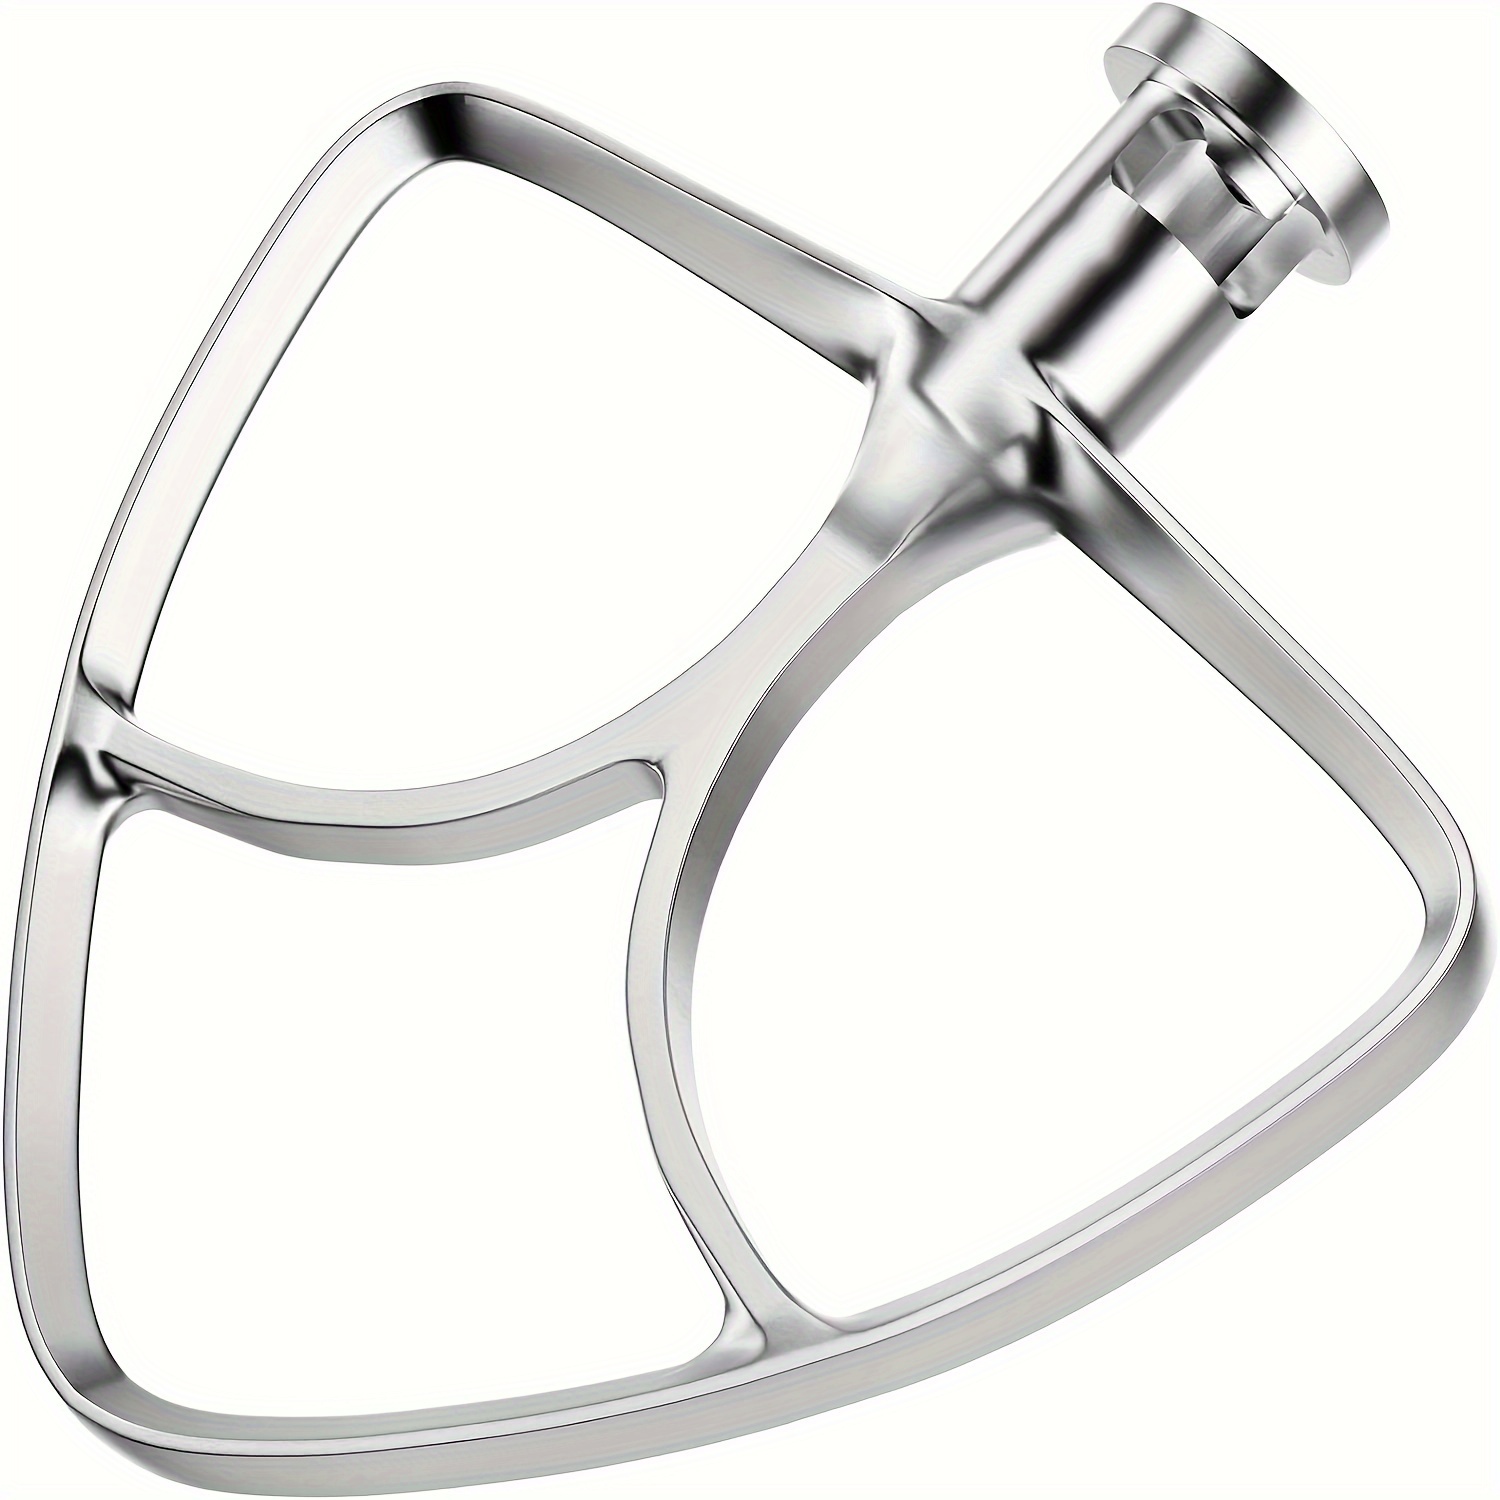  KitchenAid Pastry Tilt Head Stand Mixer Beater Attachment,  Silver: Home & Kitchen